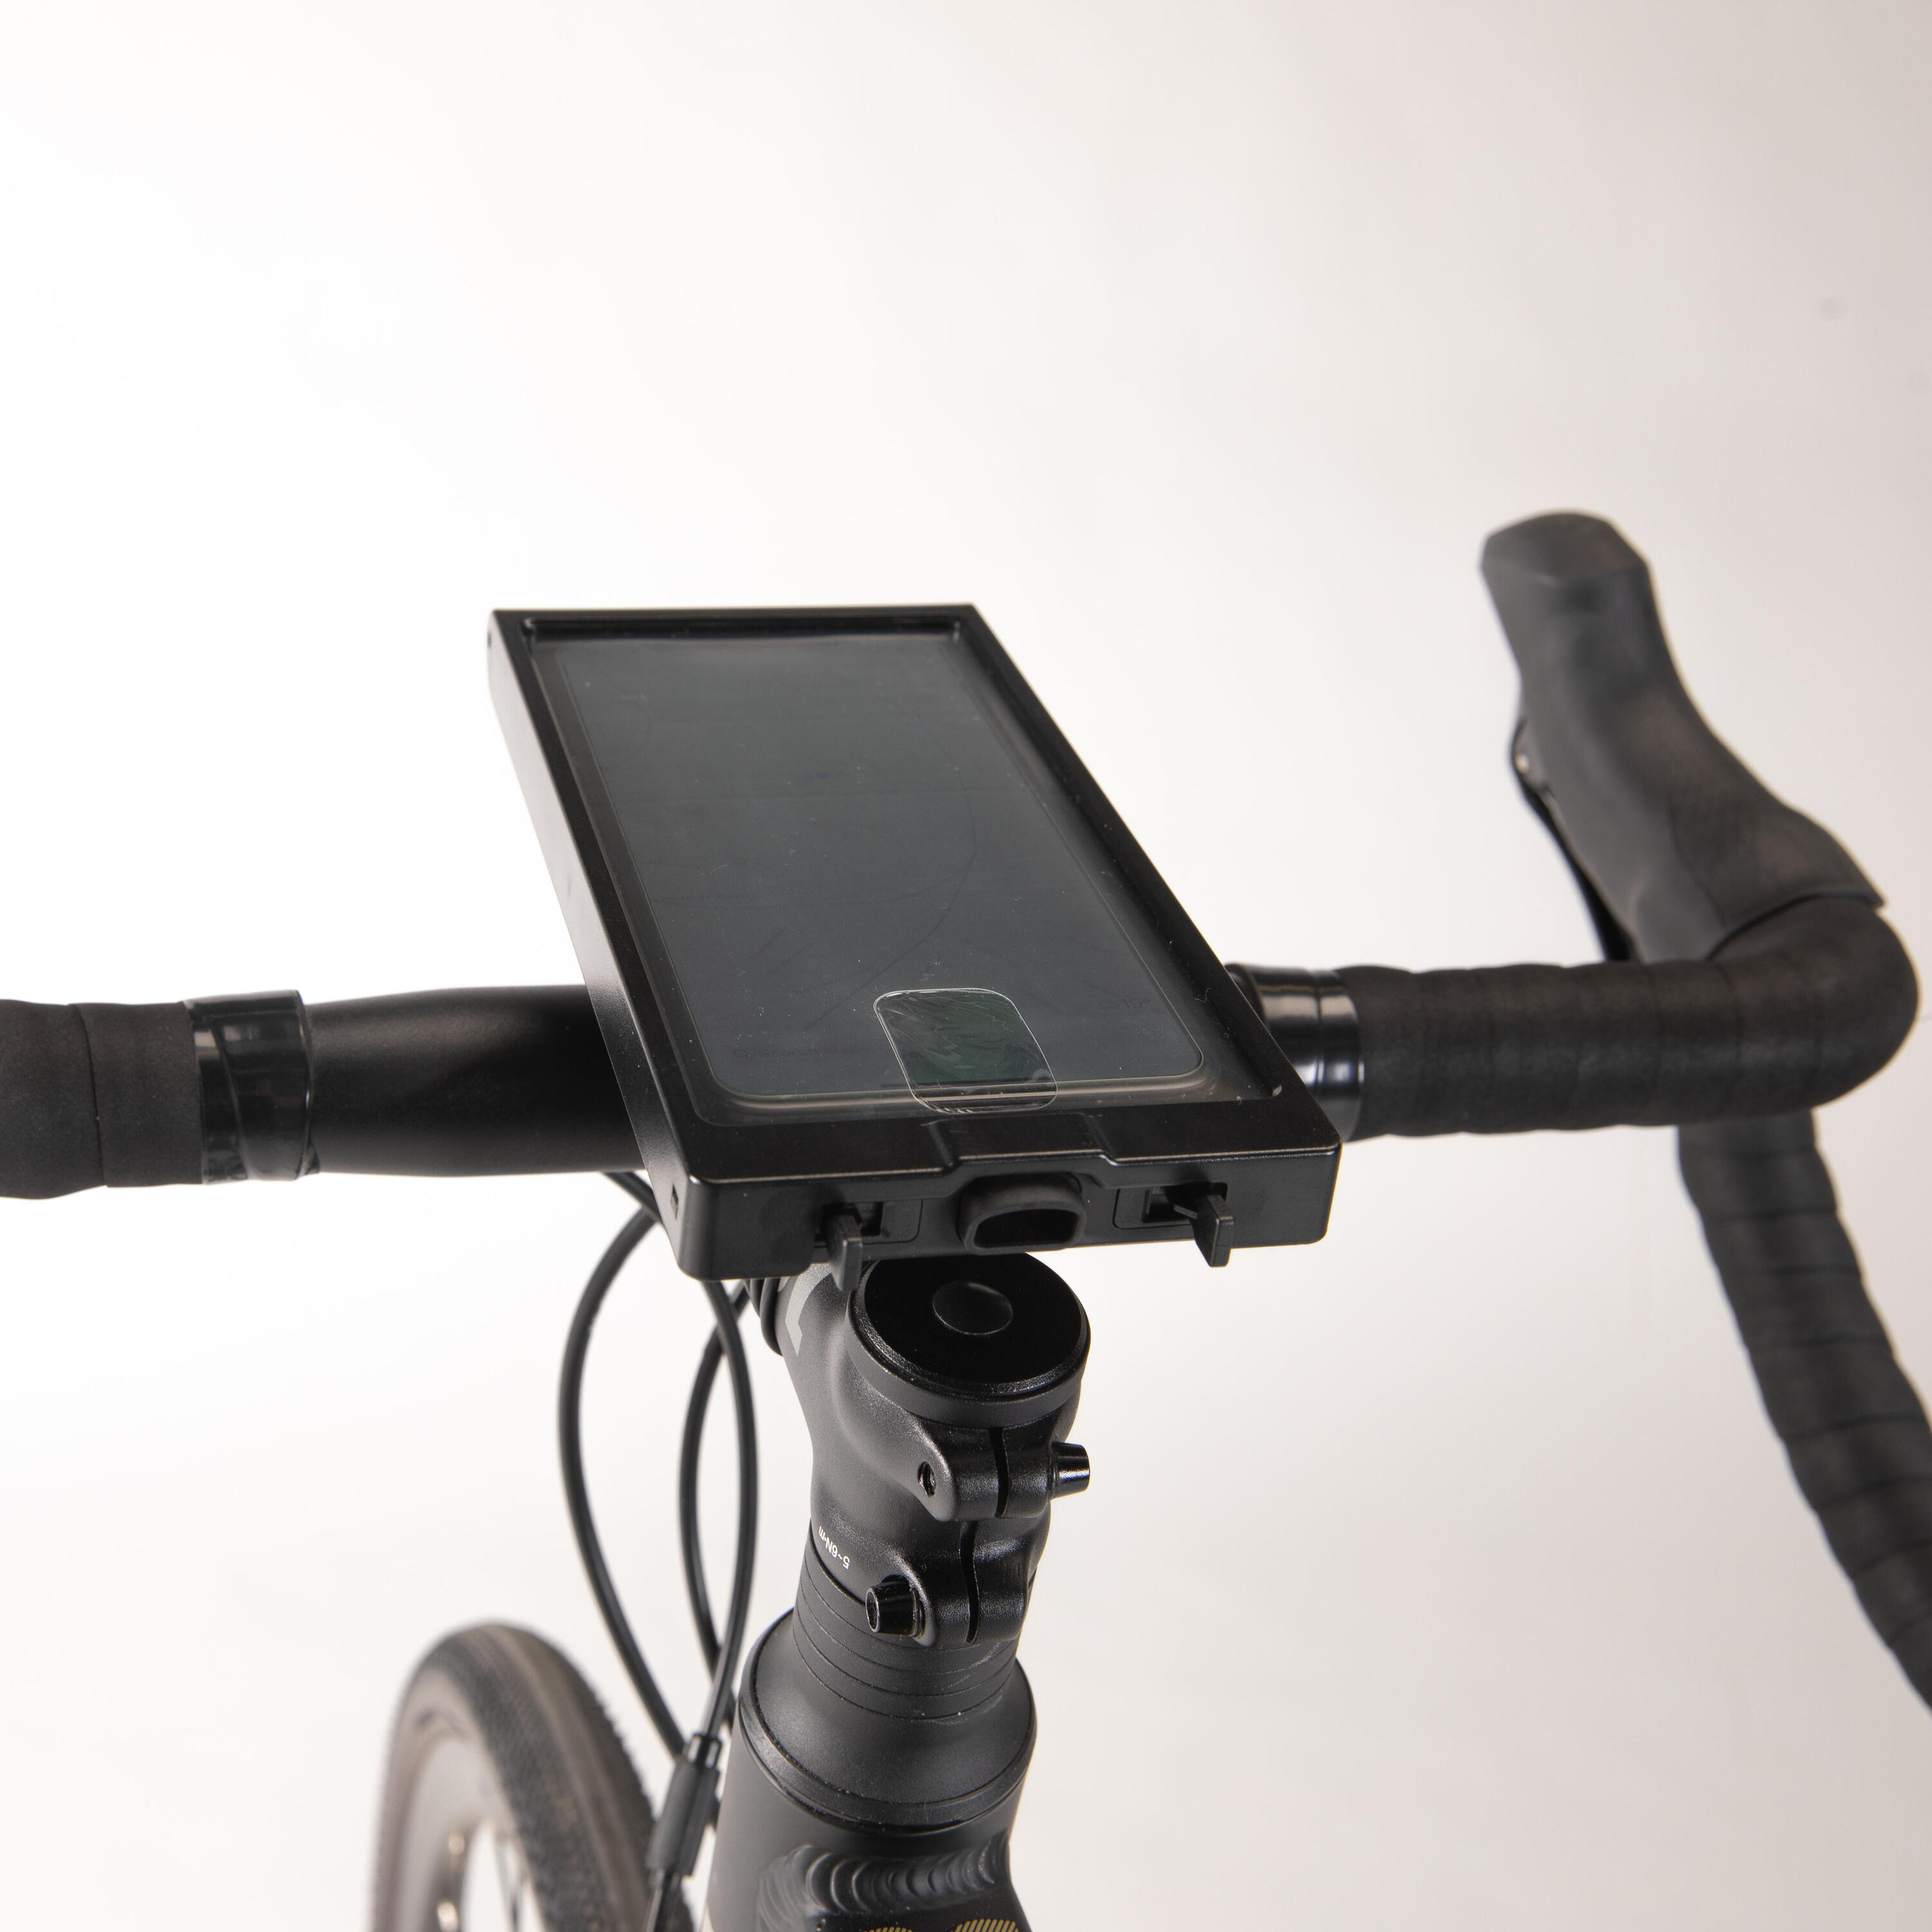 L Hardcase Cycling Smartphone Mount 4/15